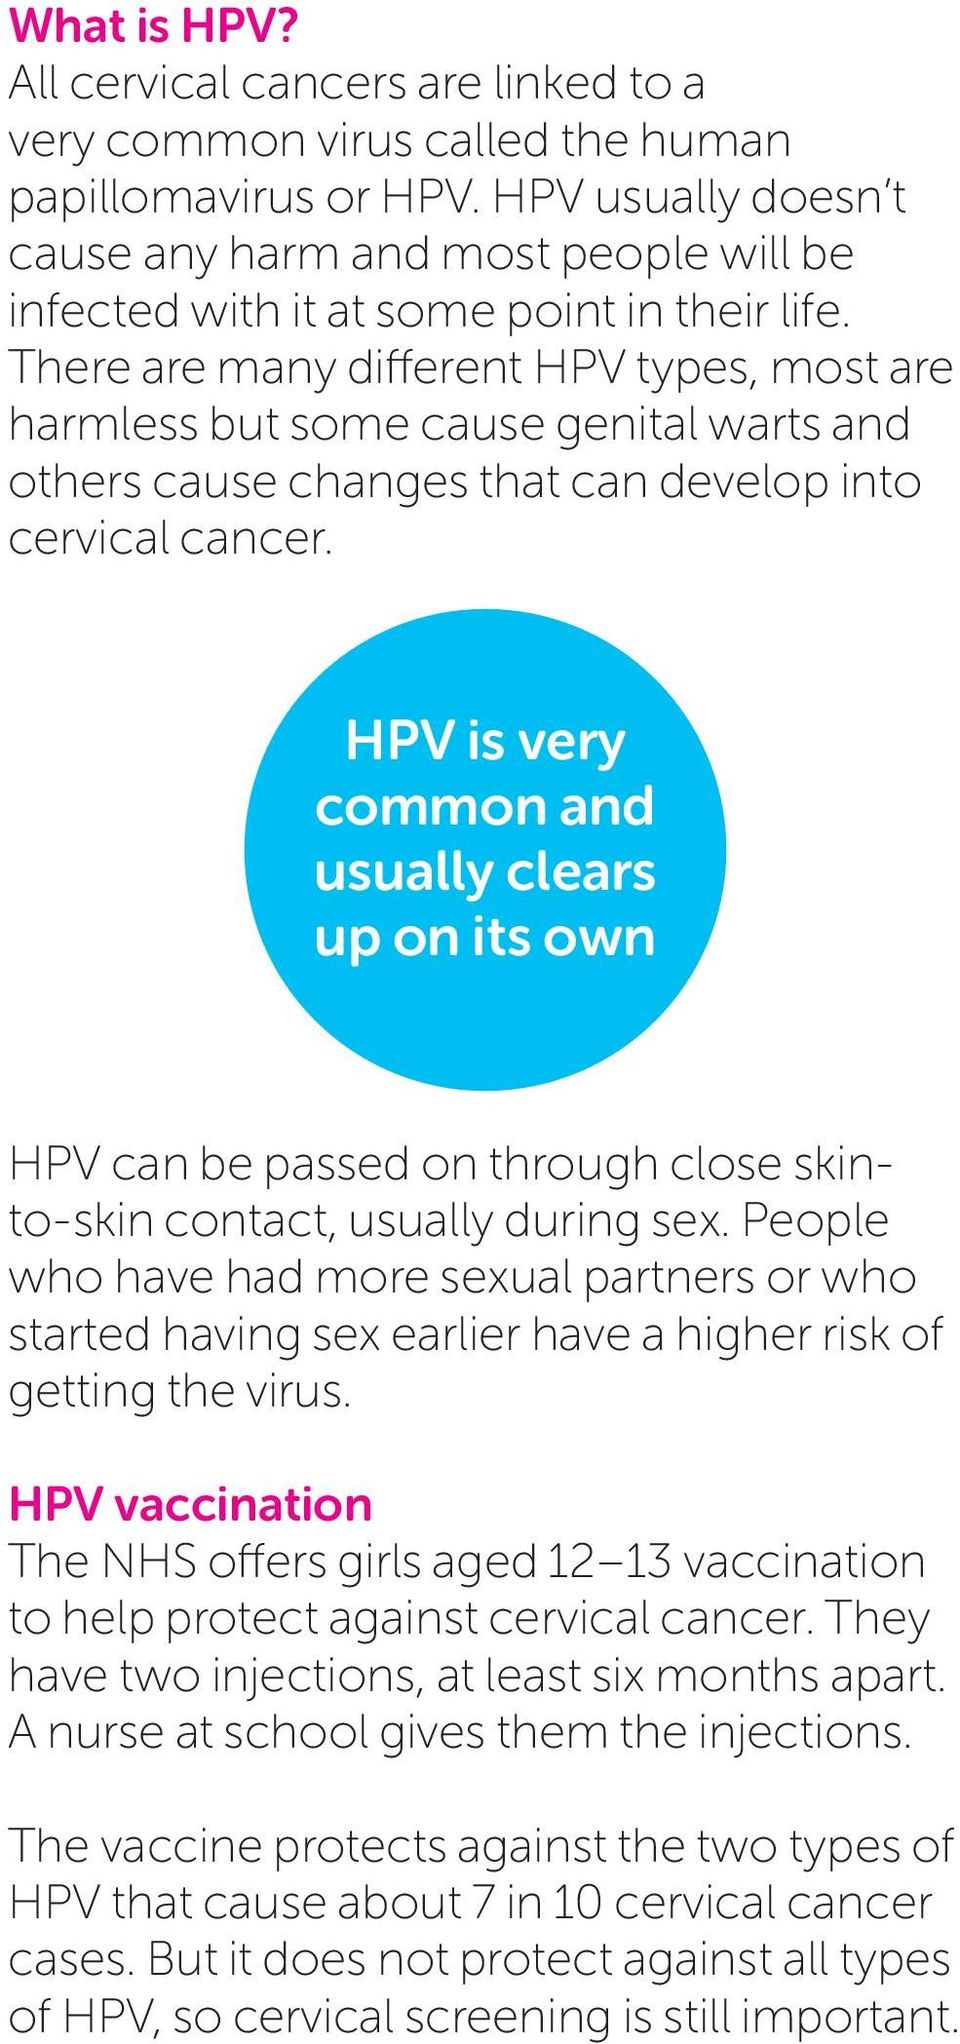 There are many different HPV types, most are harmless but some cause genital warts and others cause changes that can develop into cervical cancer.